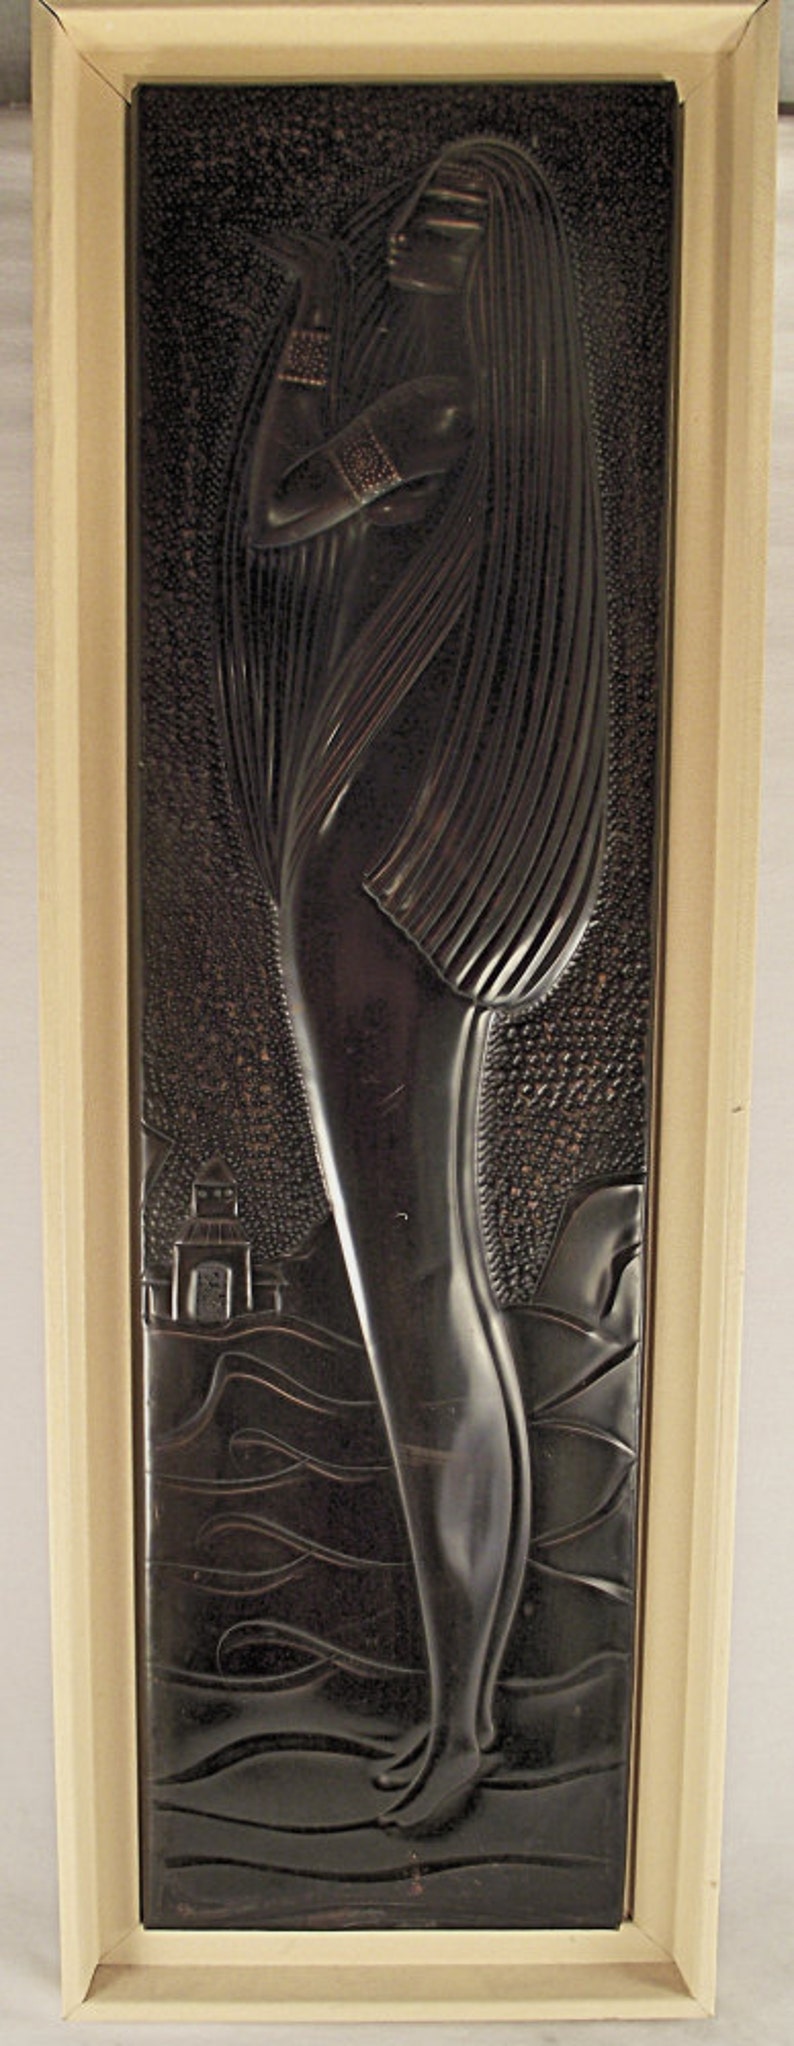 ART DECO hammered metal sculpture dinanderie of stylish female nude, dark brown patina, collectible art work. image 2